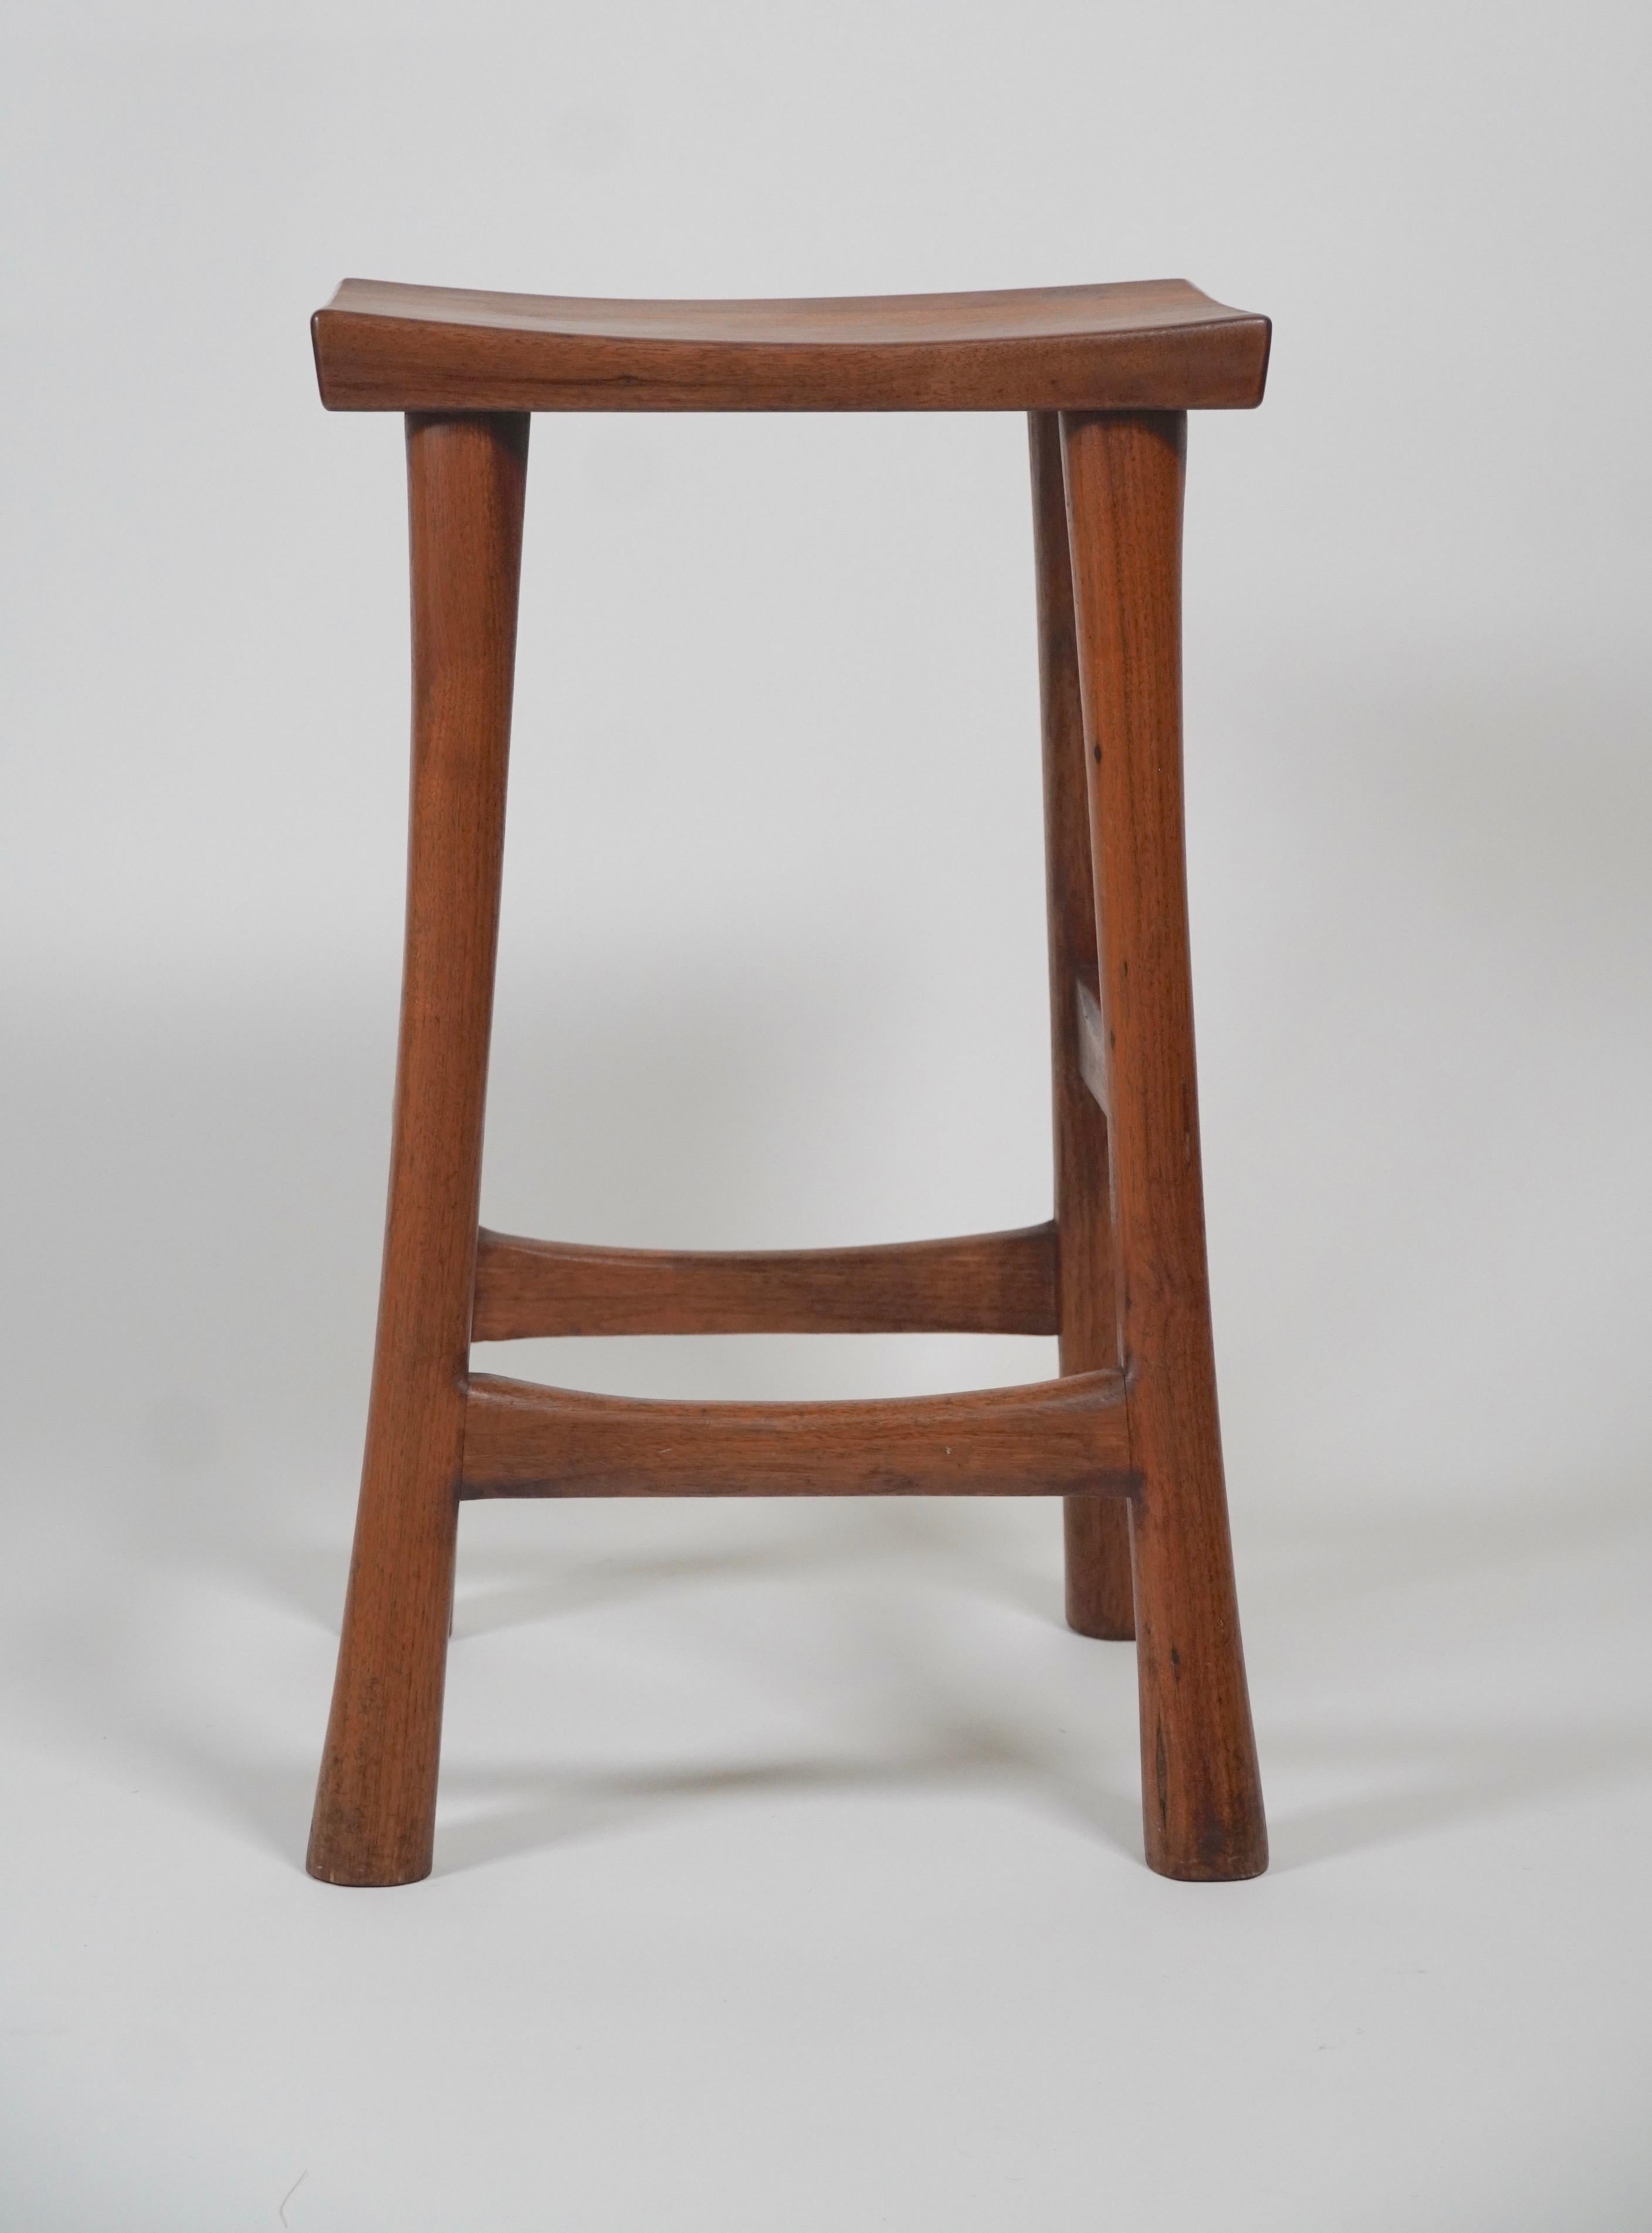 Hand-Crafted American Studio Made Organic Modern Stool in Walnut For Sale